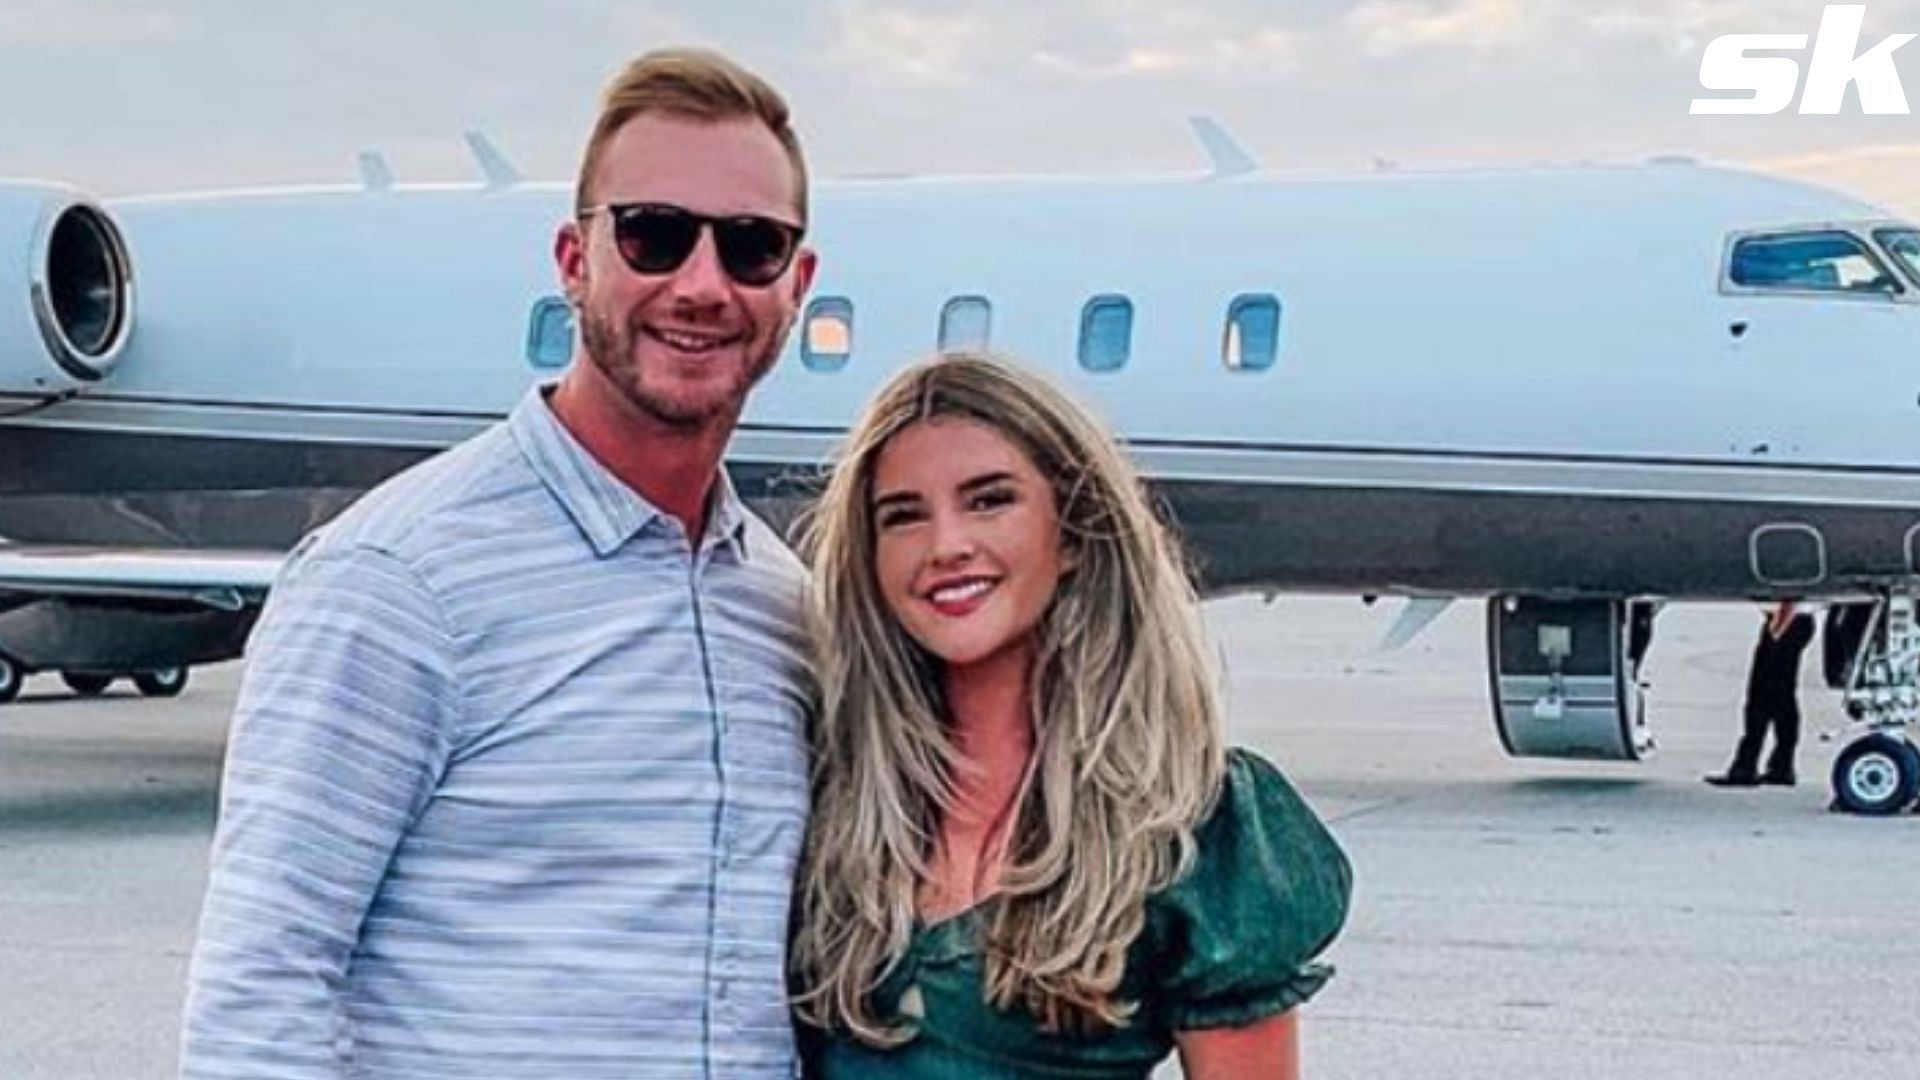 Who Is Pete Alonso's Wife? All About Haley Alonso